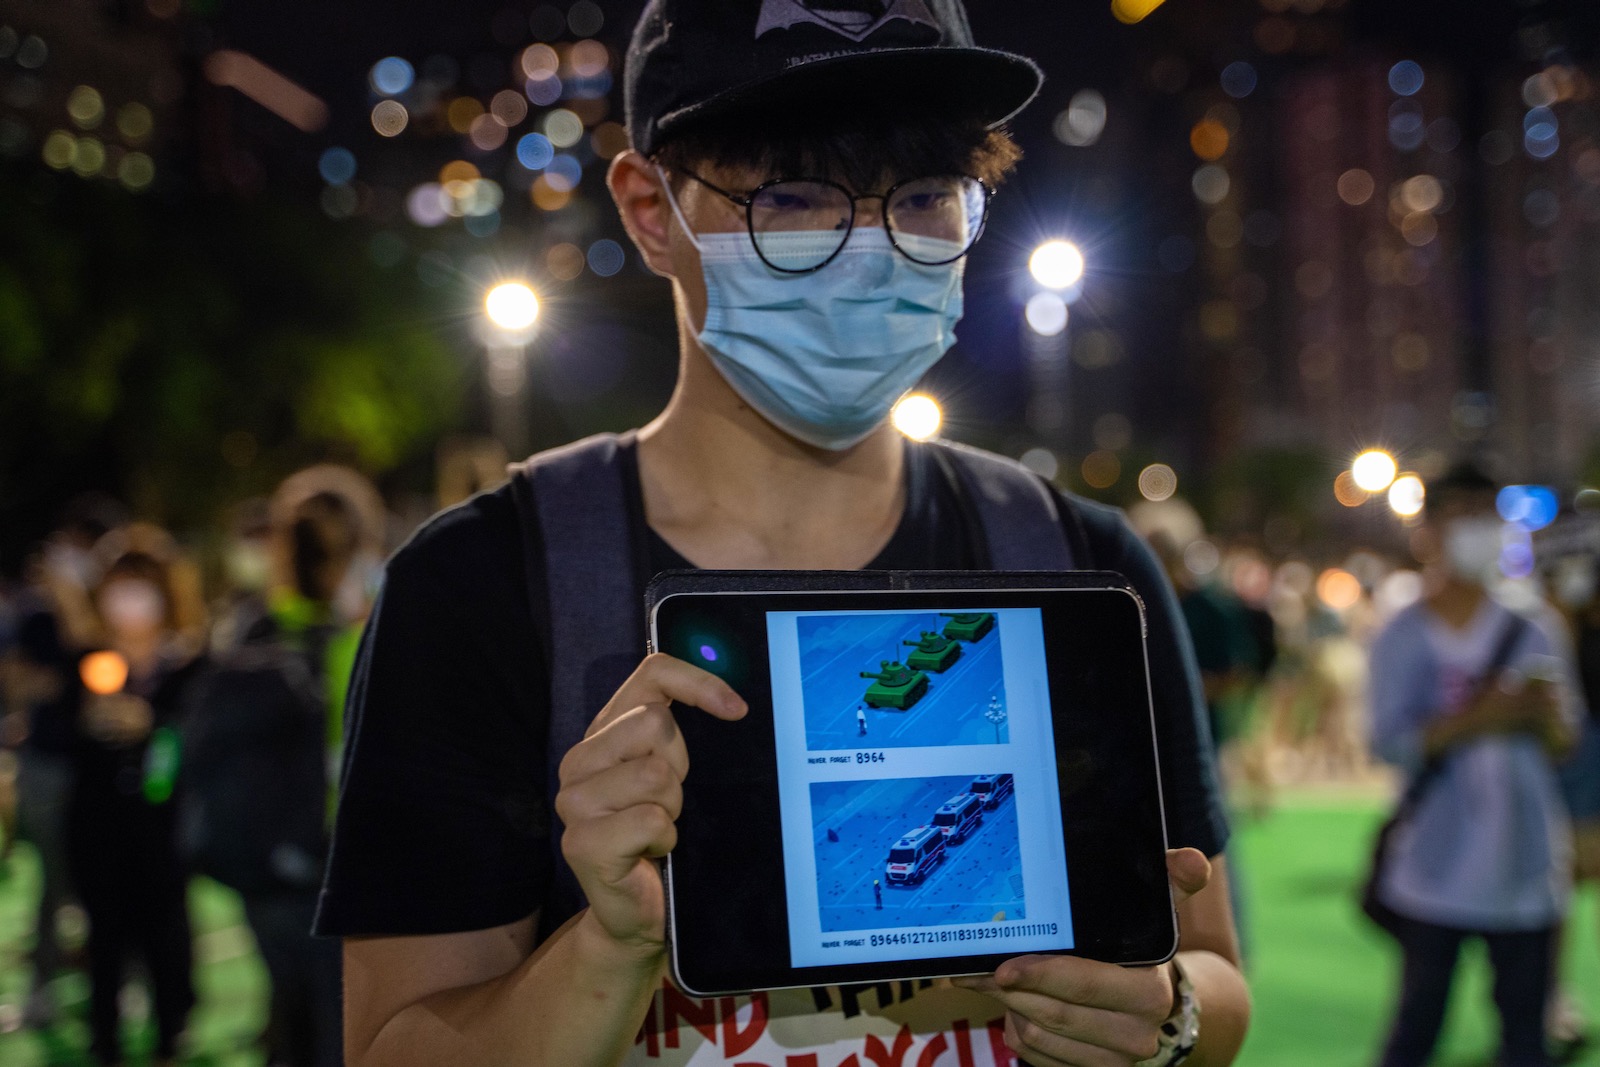 A participant displaying images on a tablet device at a vigil in Victoria Park linking pro-democracy protests with the 1989 Tiananmen Square in China, Hong Kong, June 4, 2020